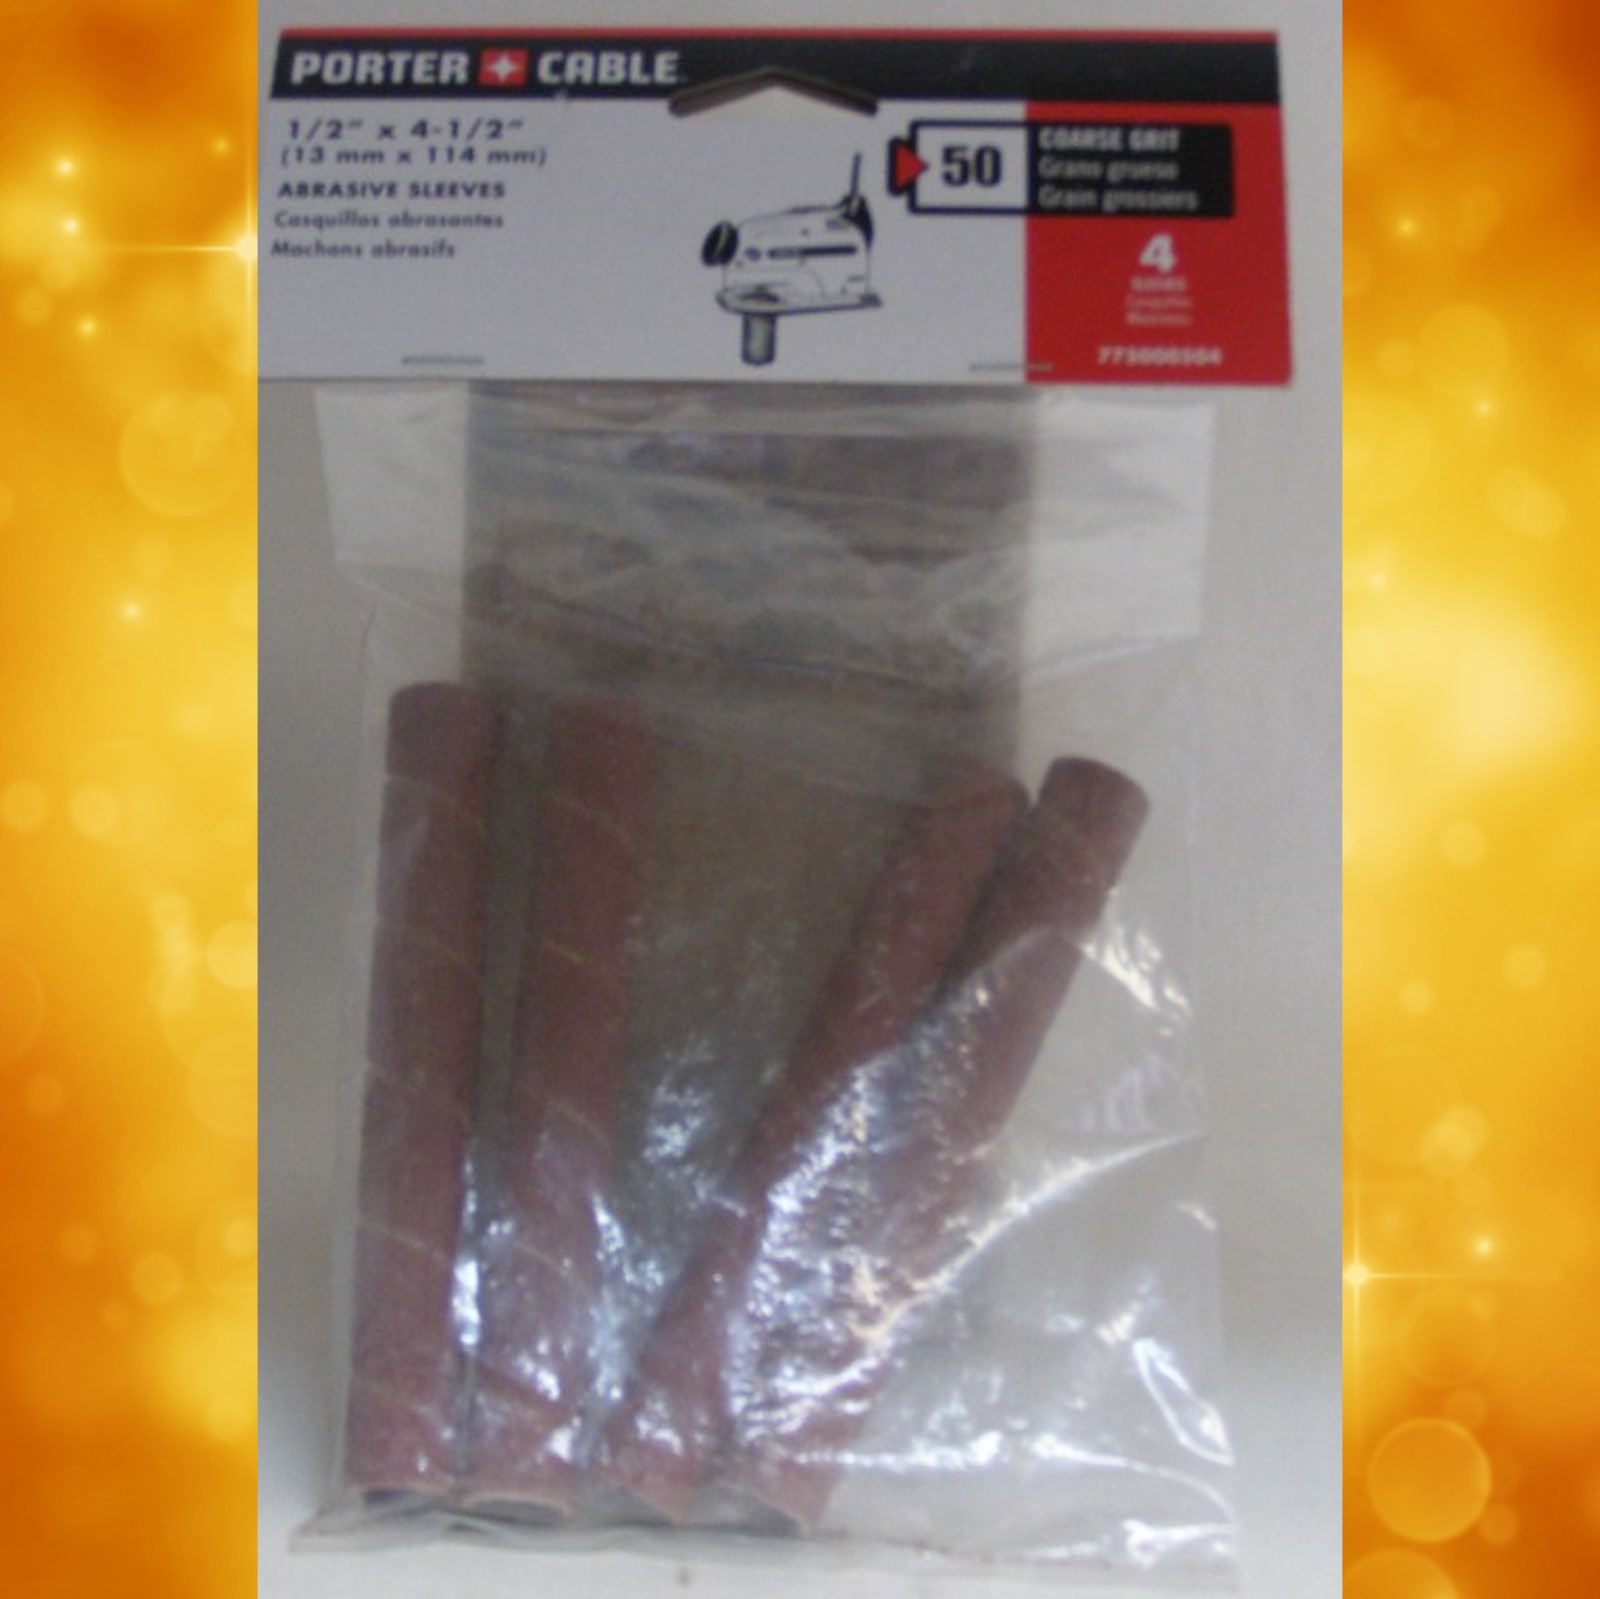 Porter-Cable 1/2" Drum Spindle Sanding Sleeve - 50 Grit 775000504